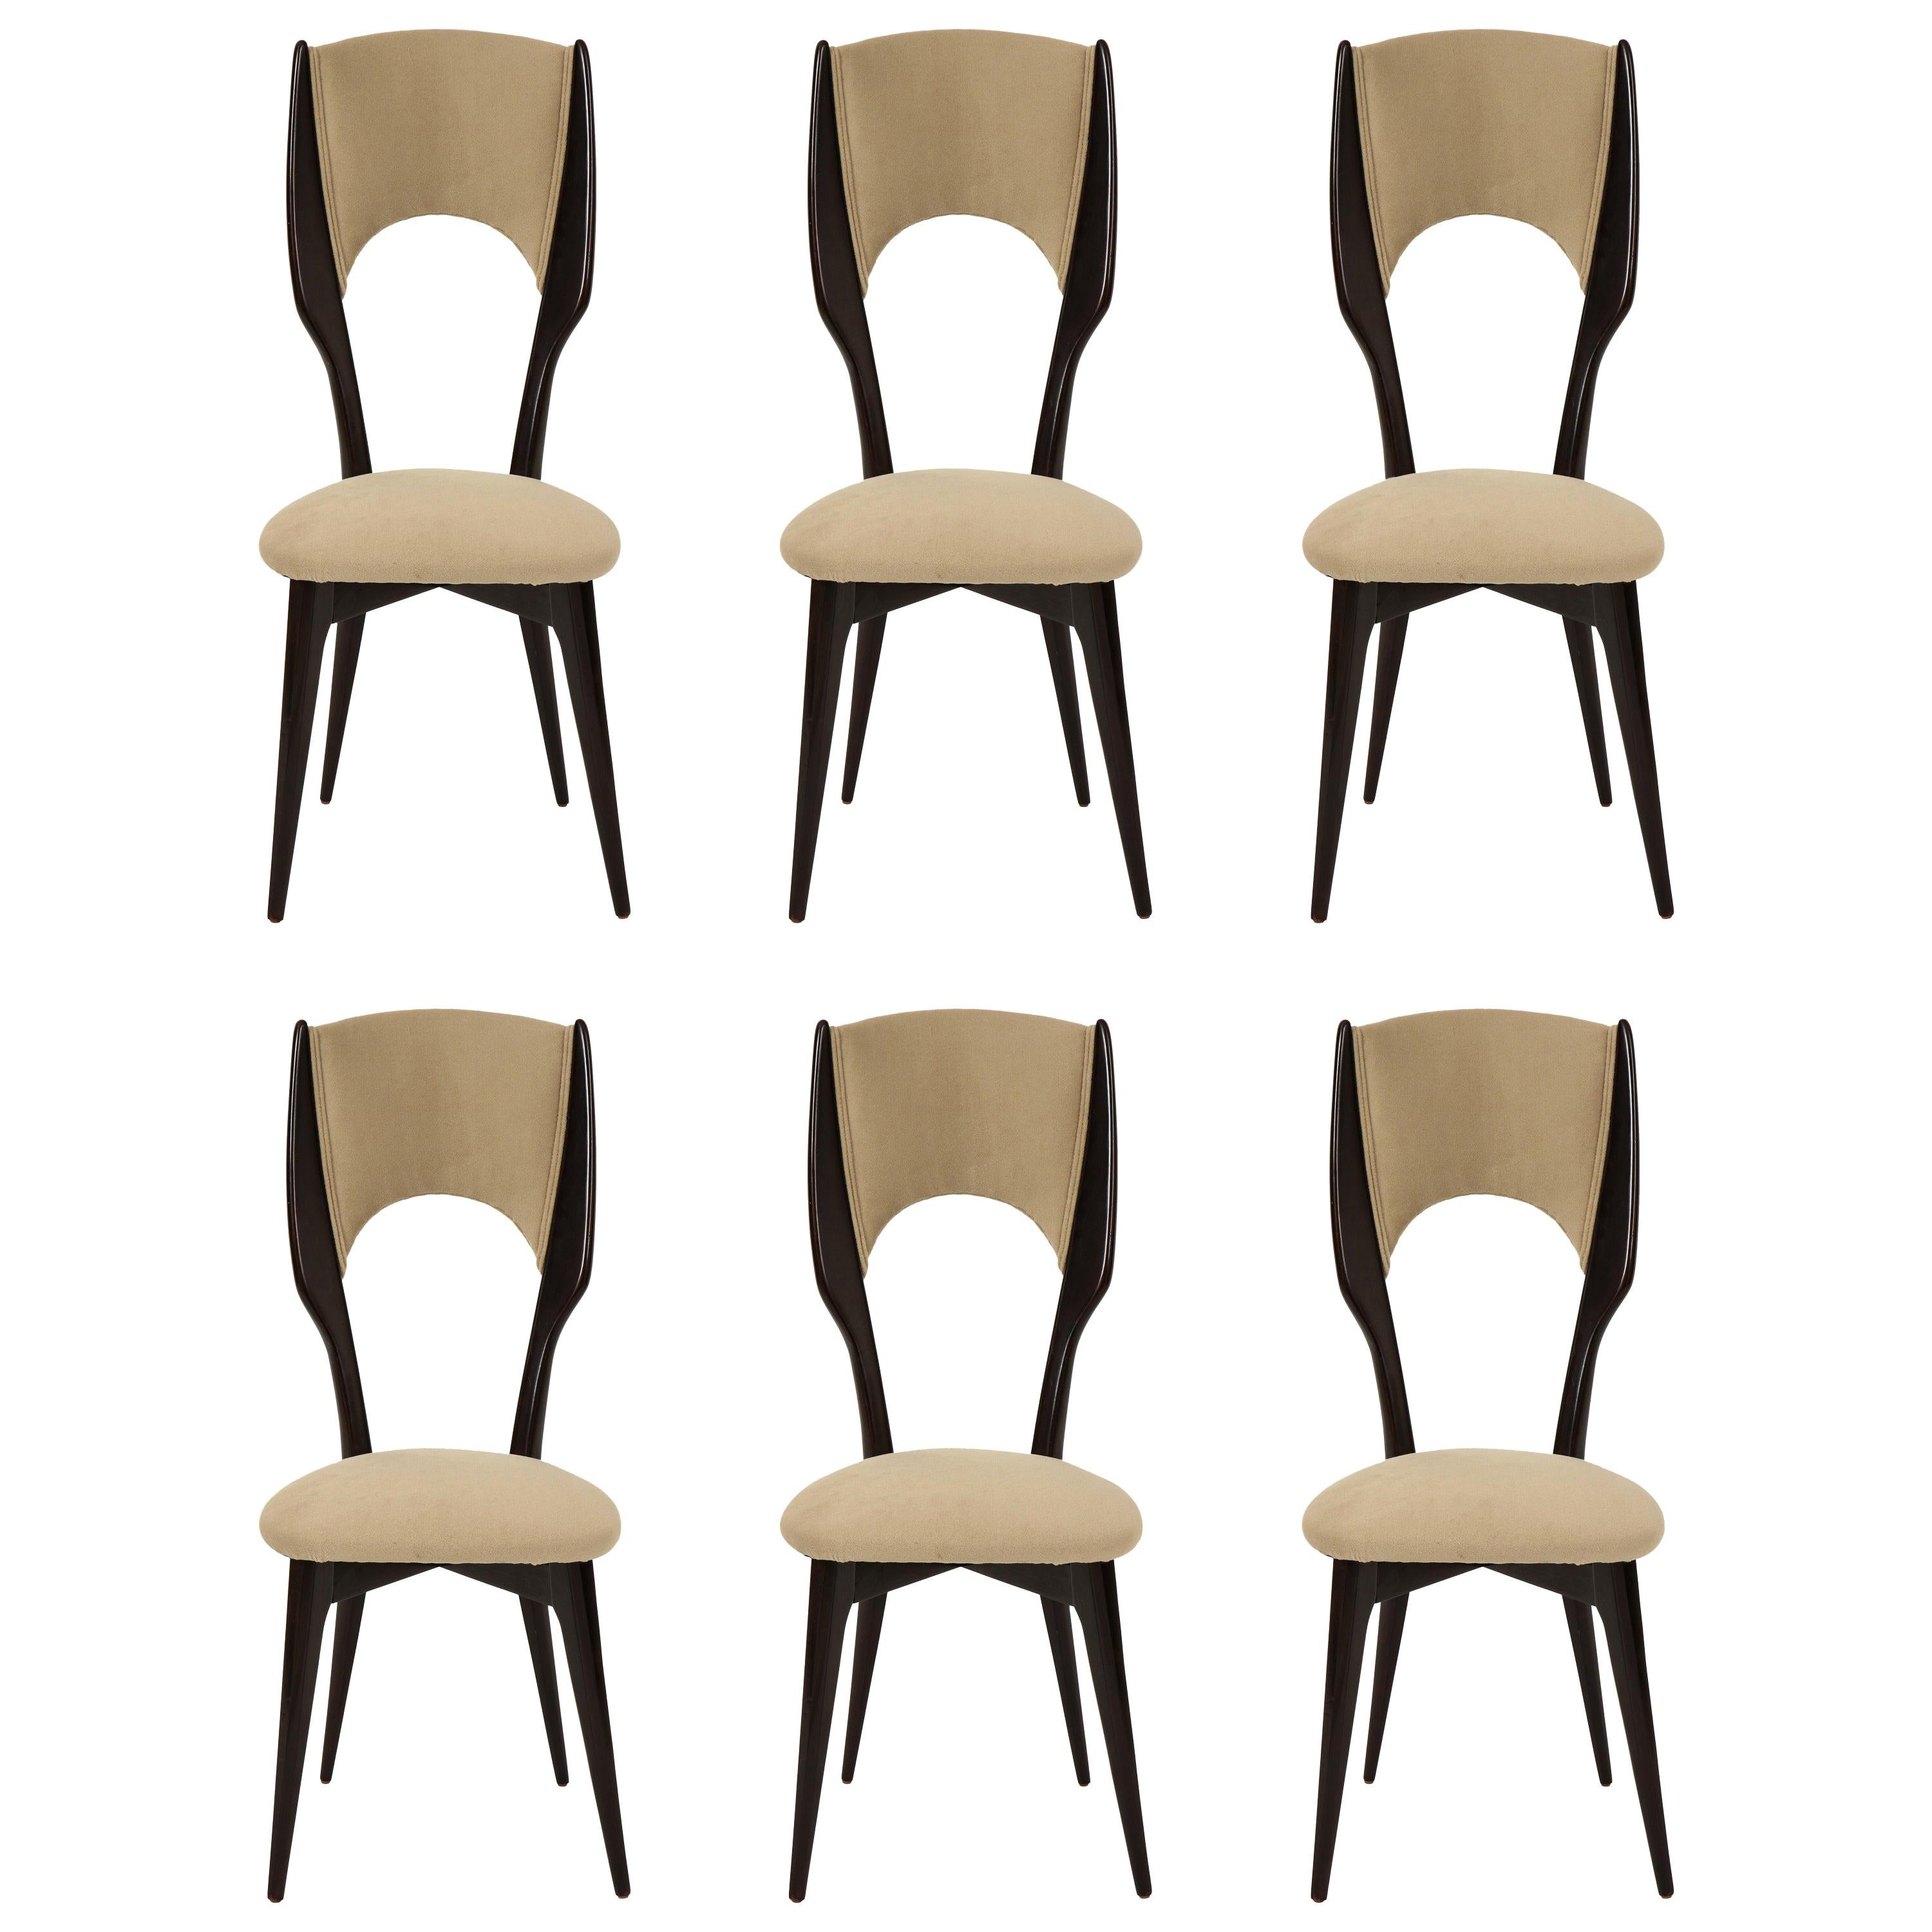 Six Vintage Borsani Style Dining Chairs Beige Cashmere Fabric, Italy, 1950s